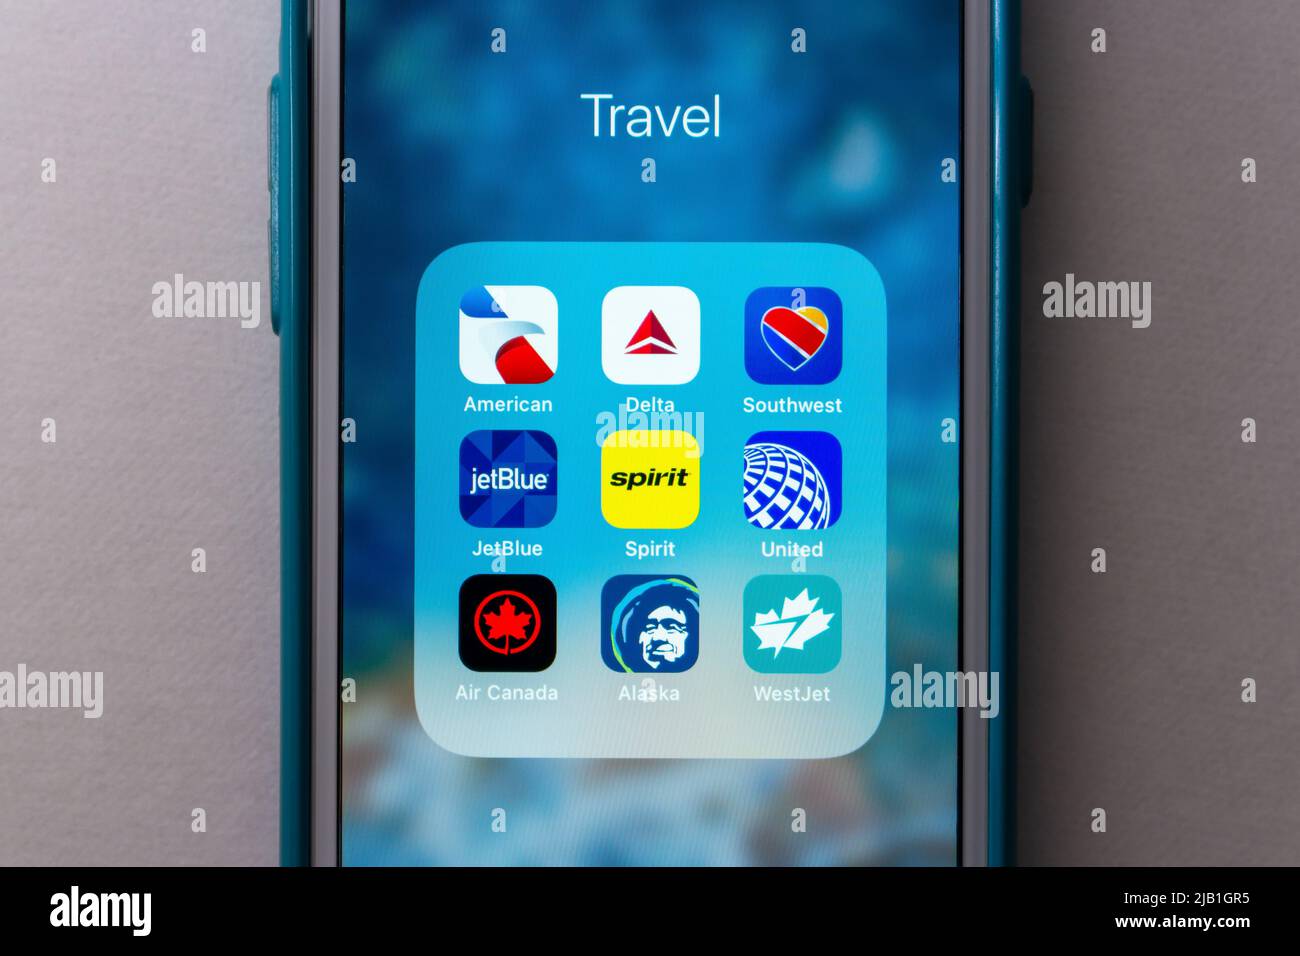 US airline icons on iPhone (American Airlines, Delta, Southwest, United Airlines, Air Canada, Alaska Airlines, JetBlue Airways, Spirit and WestJet). Stock Photo